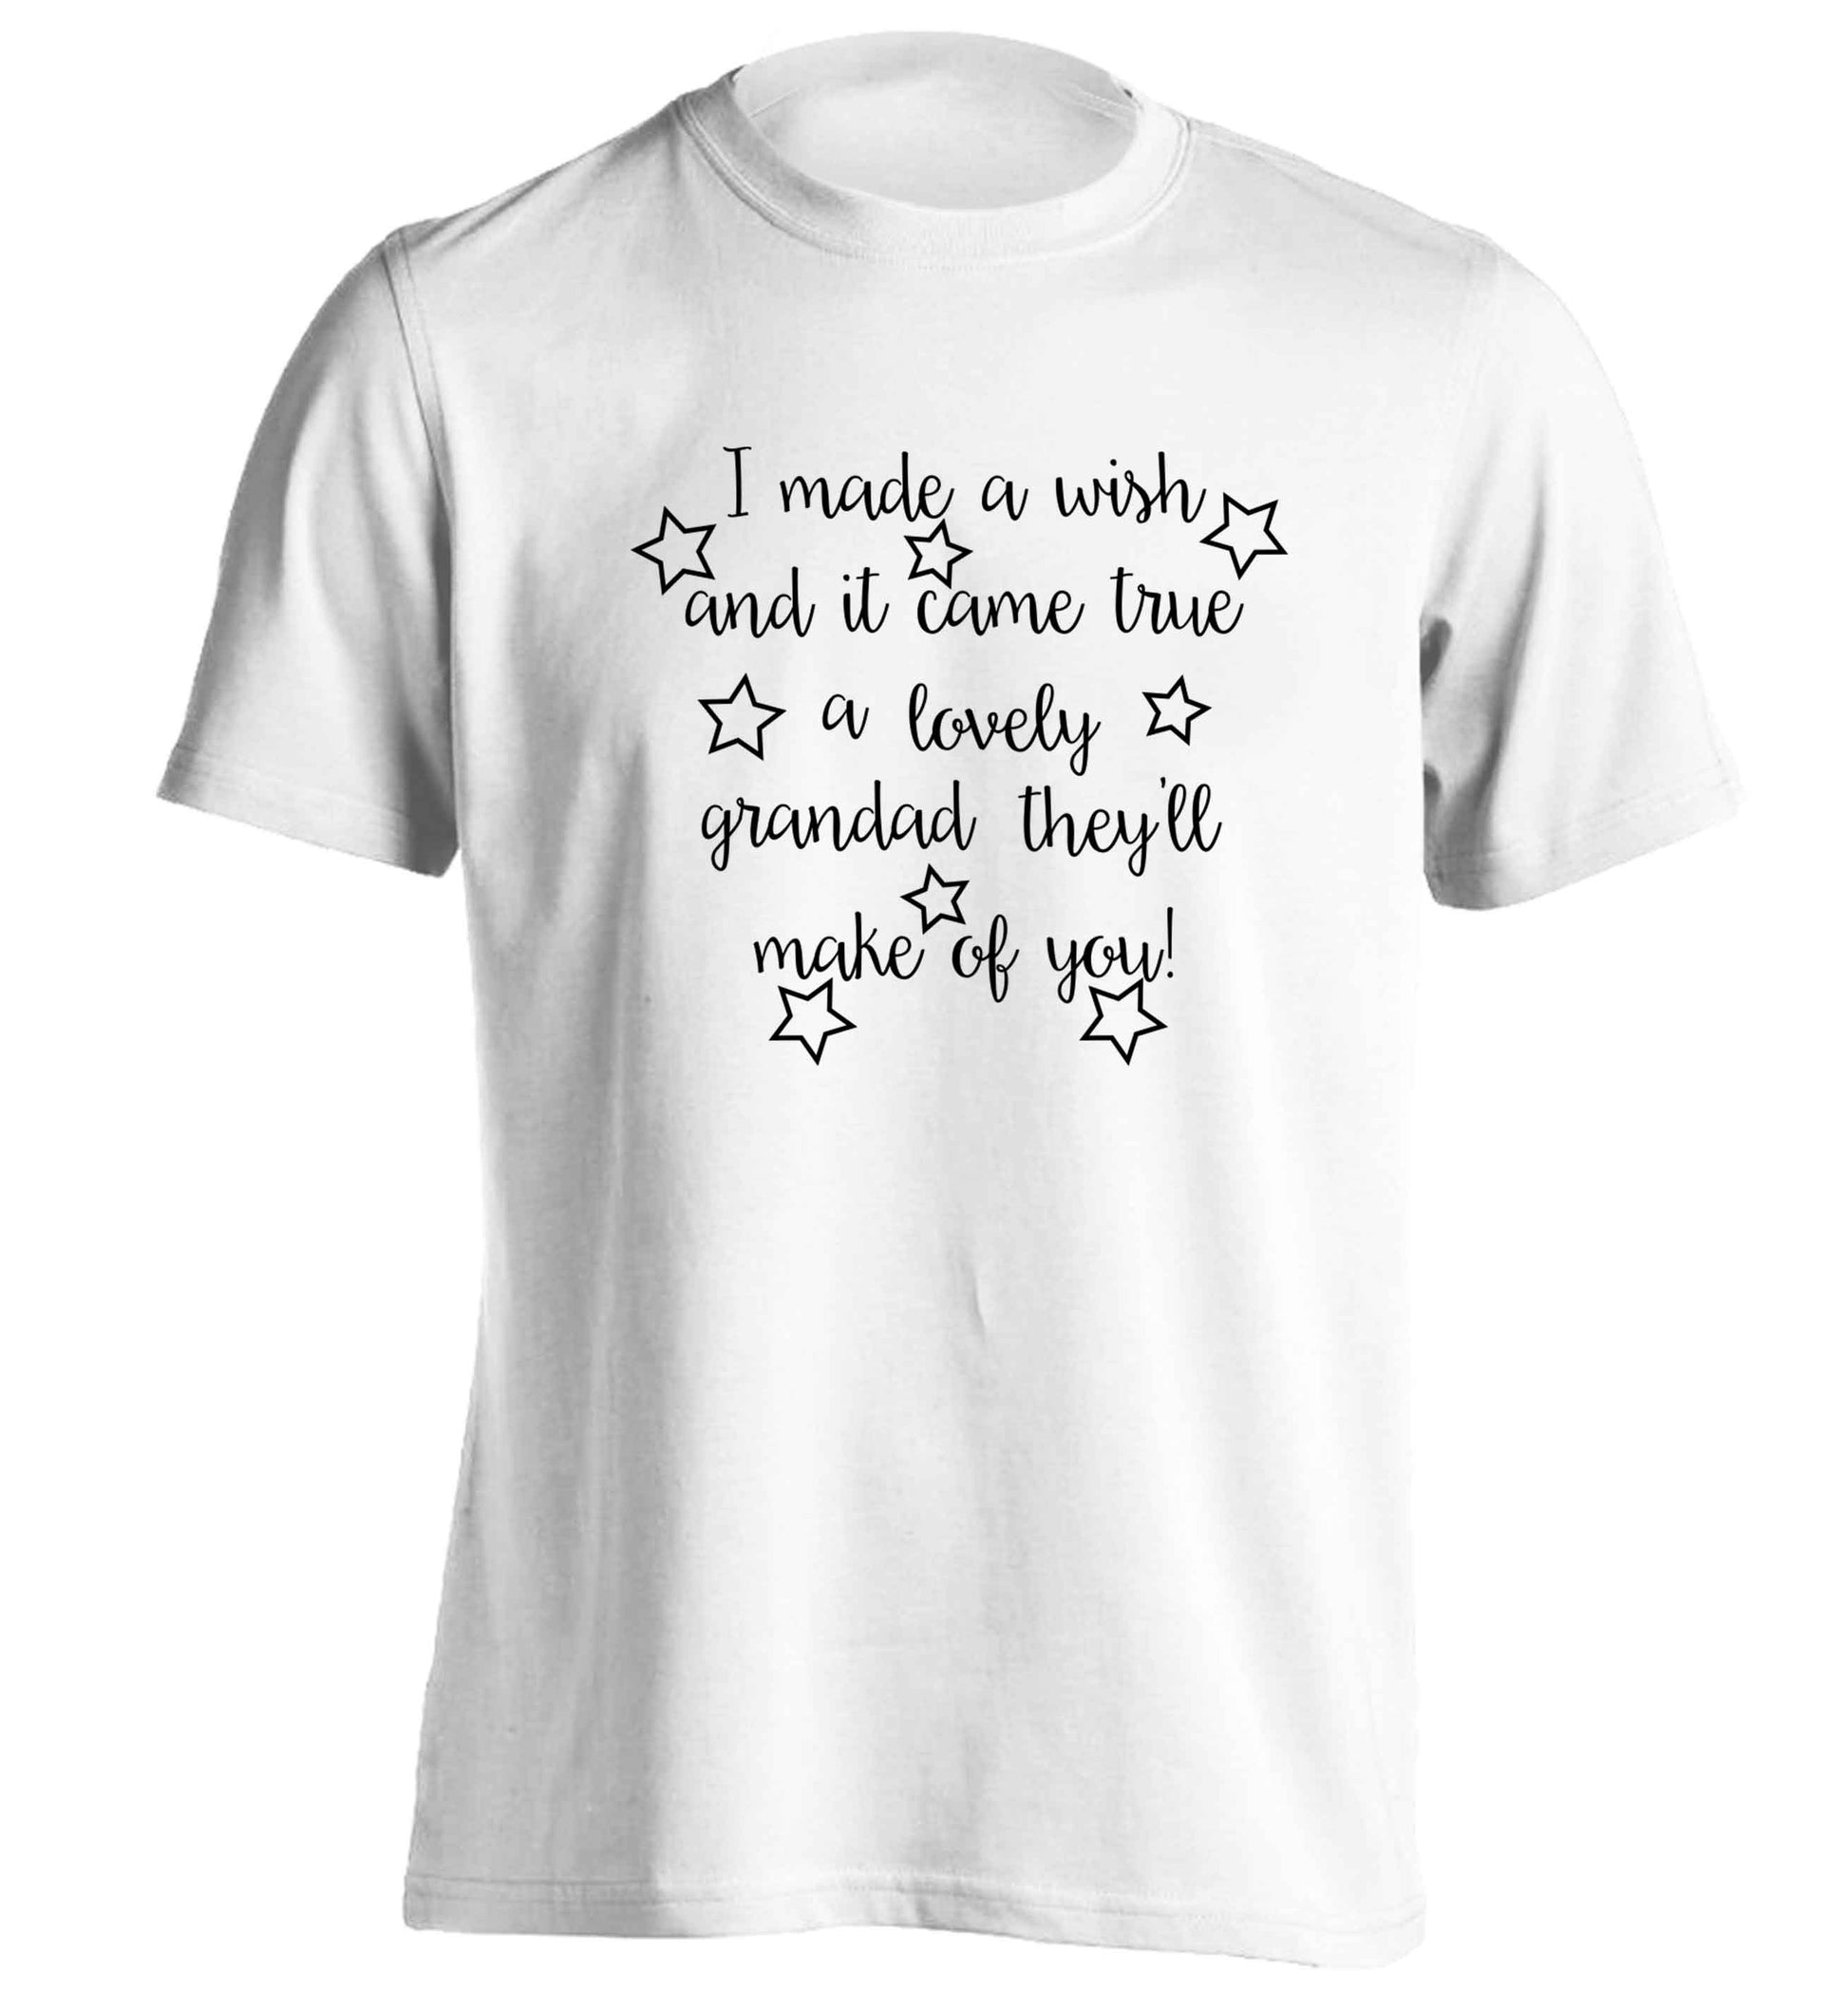 I made a wish and it came true a lovely grandad they'll make of you! adults unisex white Tshirt 2XL